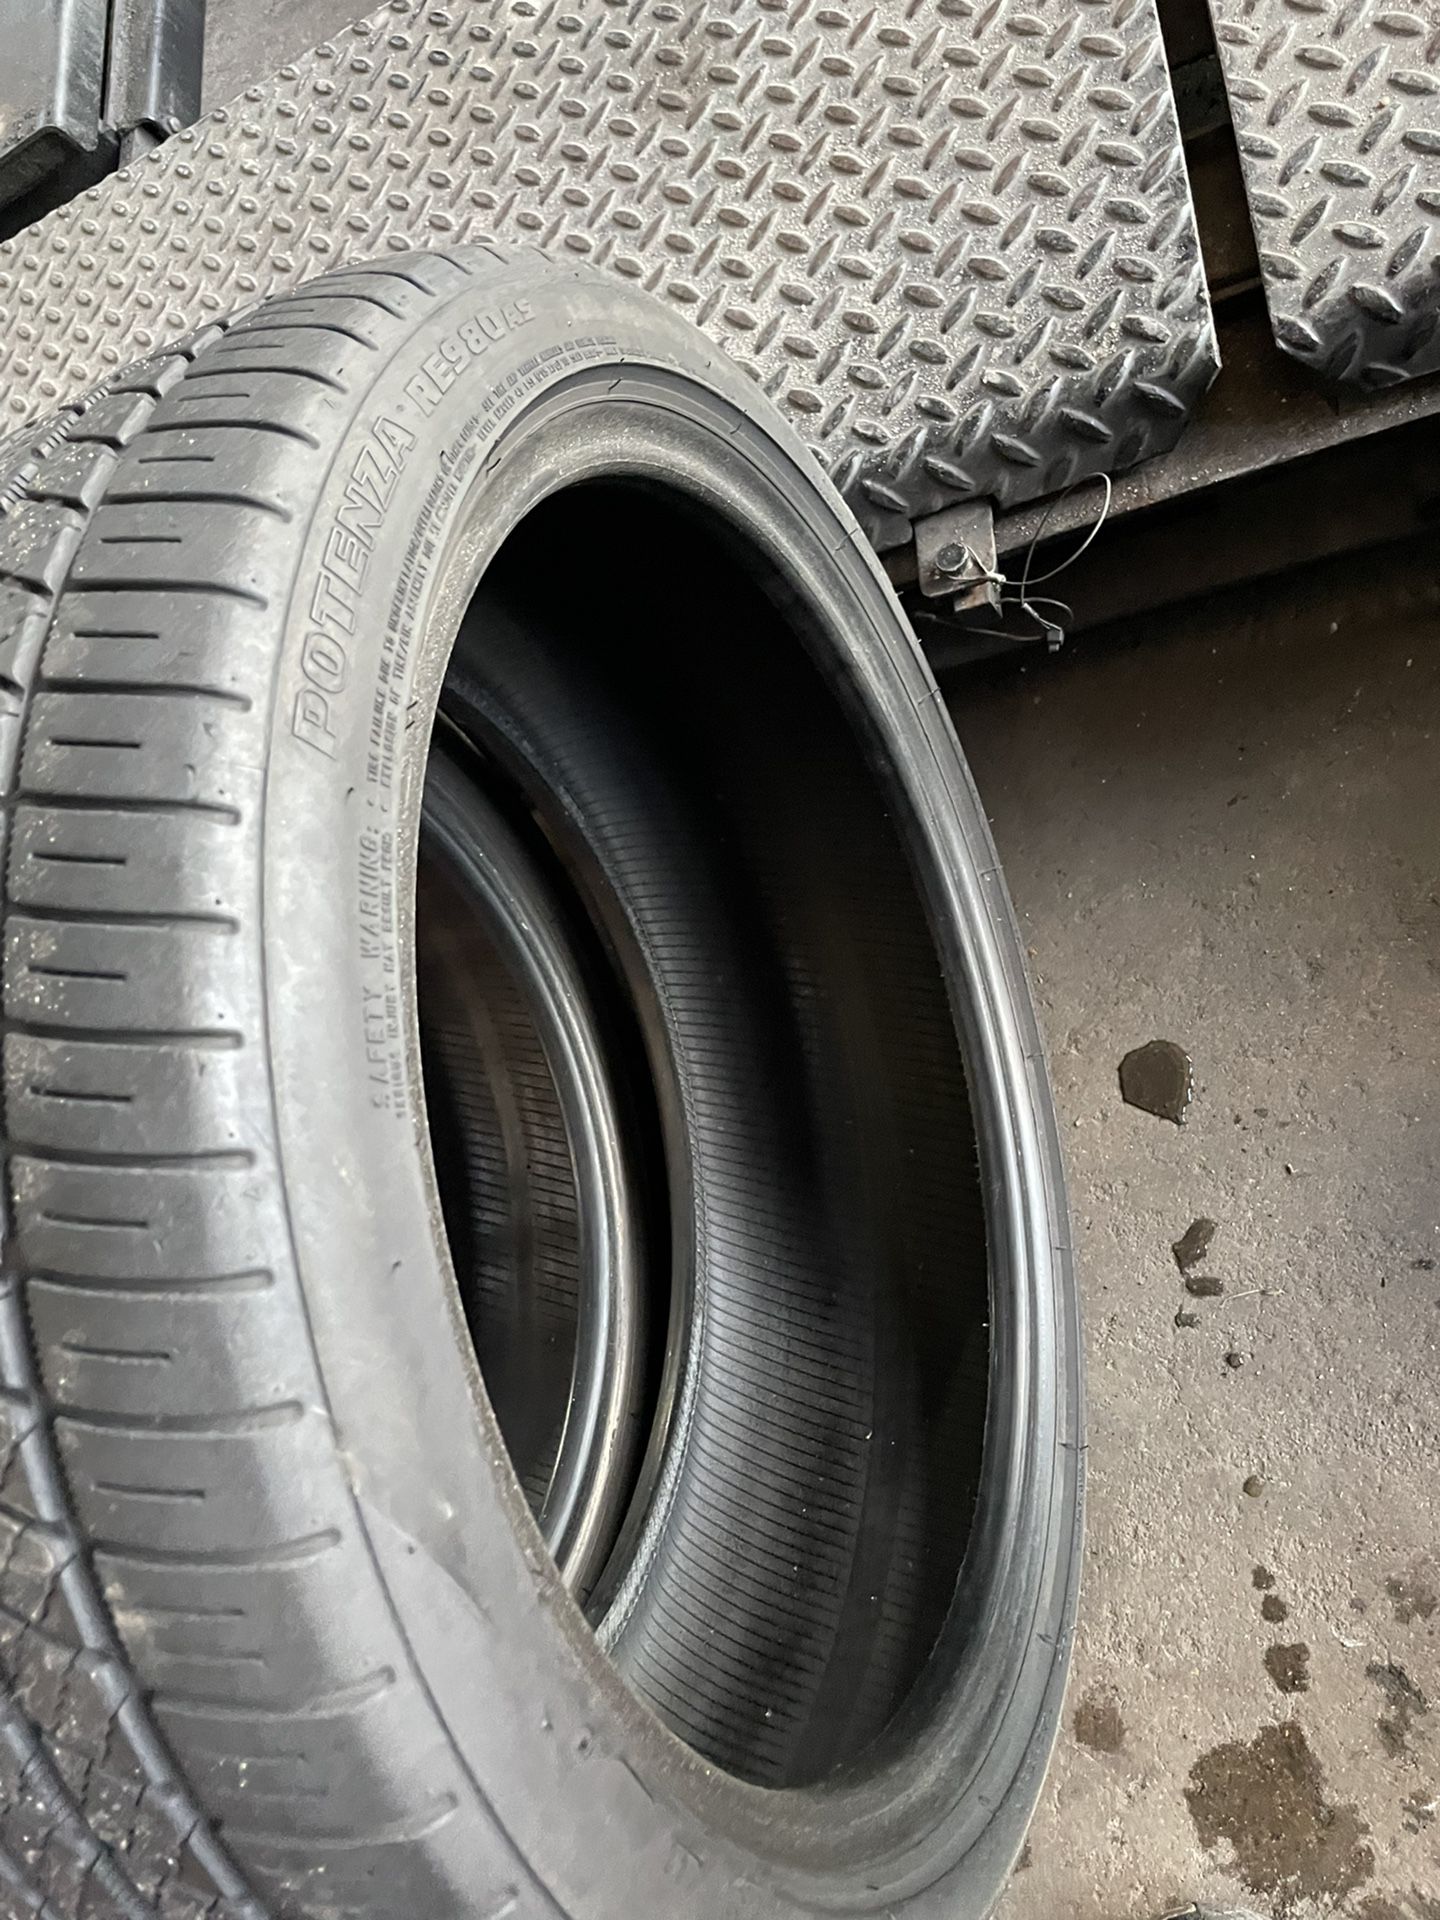 2 … 22540R18 Bridgestone Potenza Run flat Tires For $120 for The Pair Picked Up Or $150 Installed And Balanced .  Texas Extreme Tire Co 1305 Presto